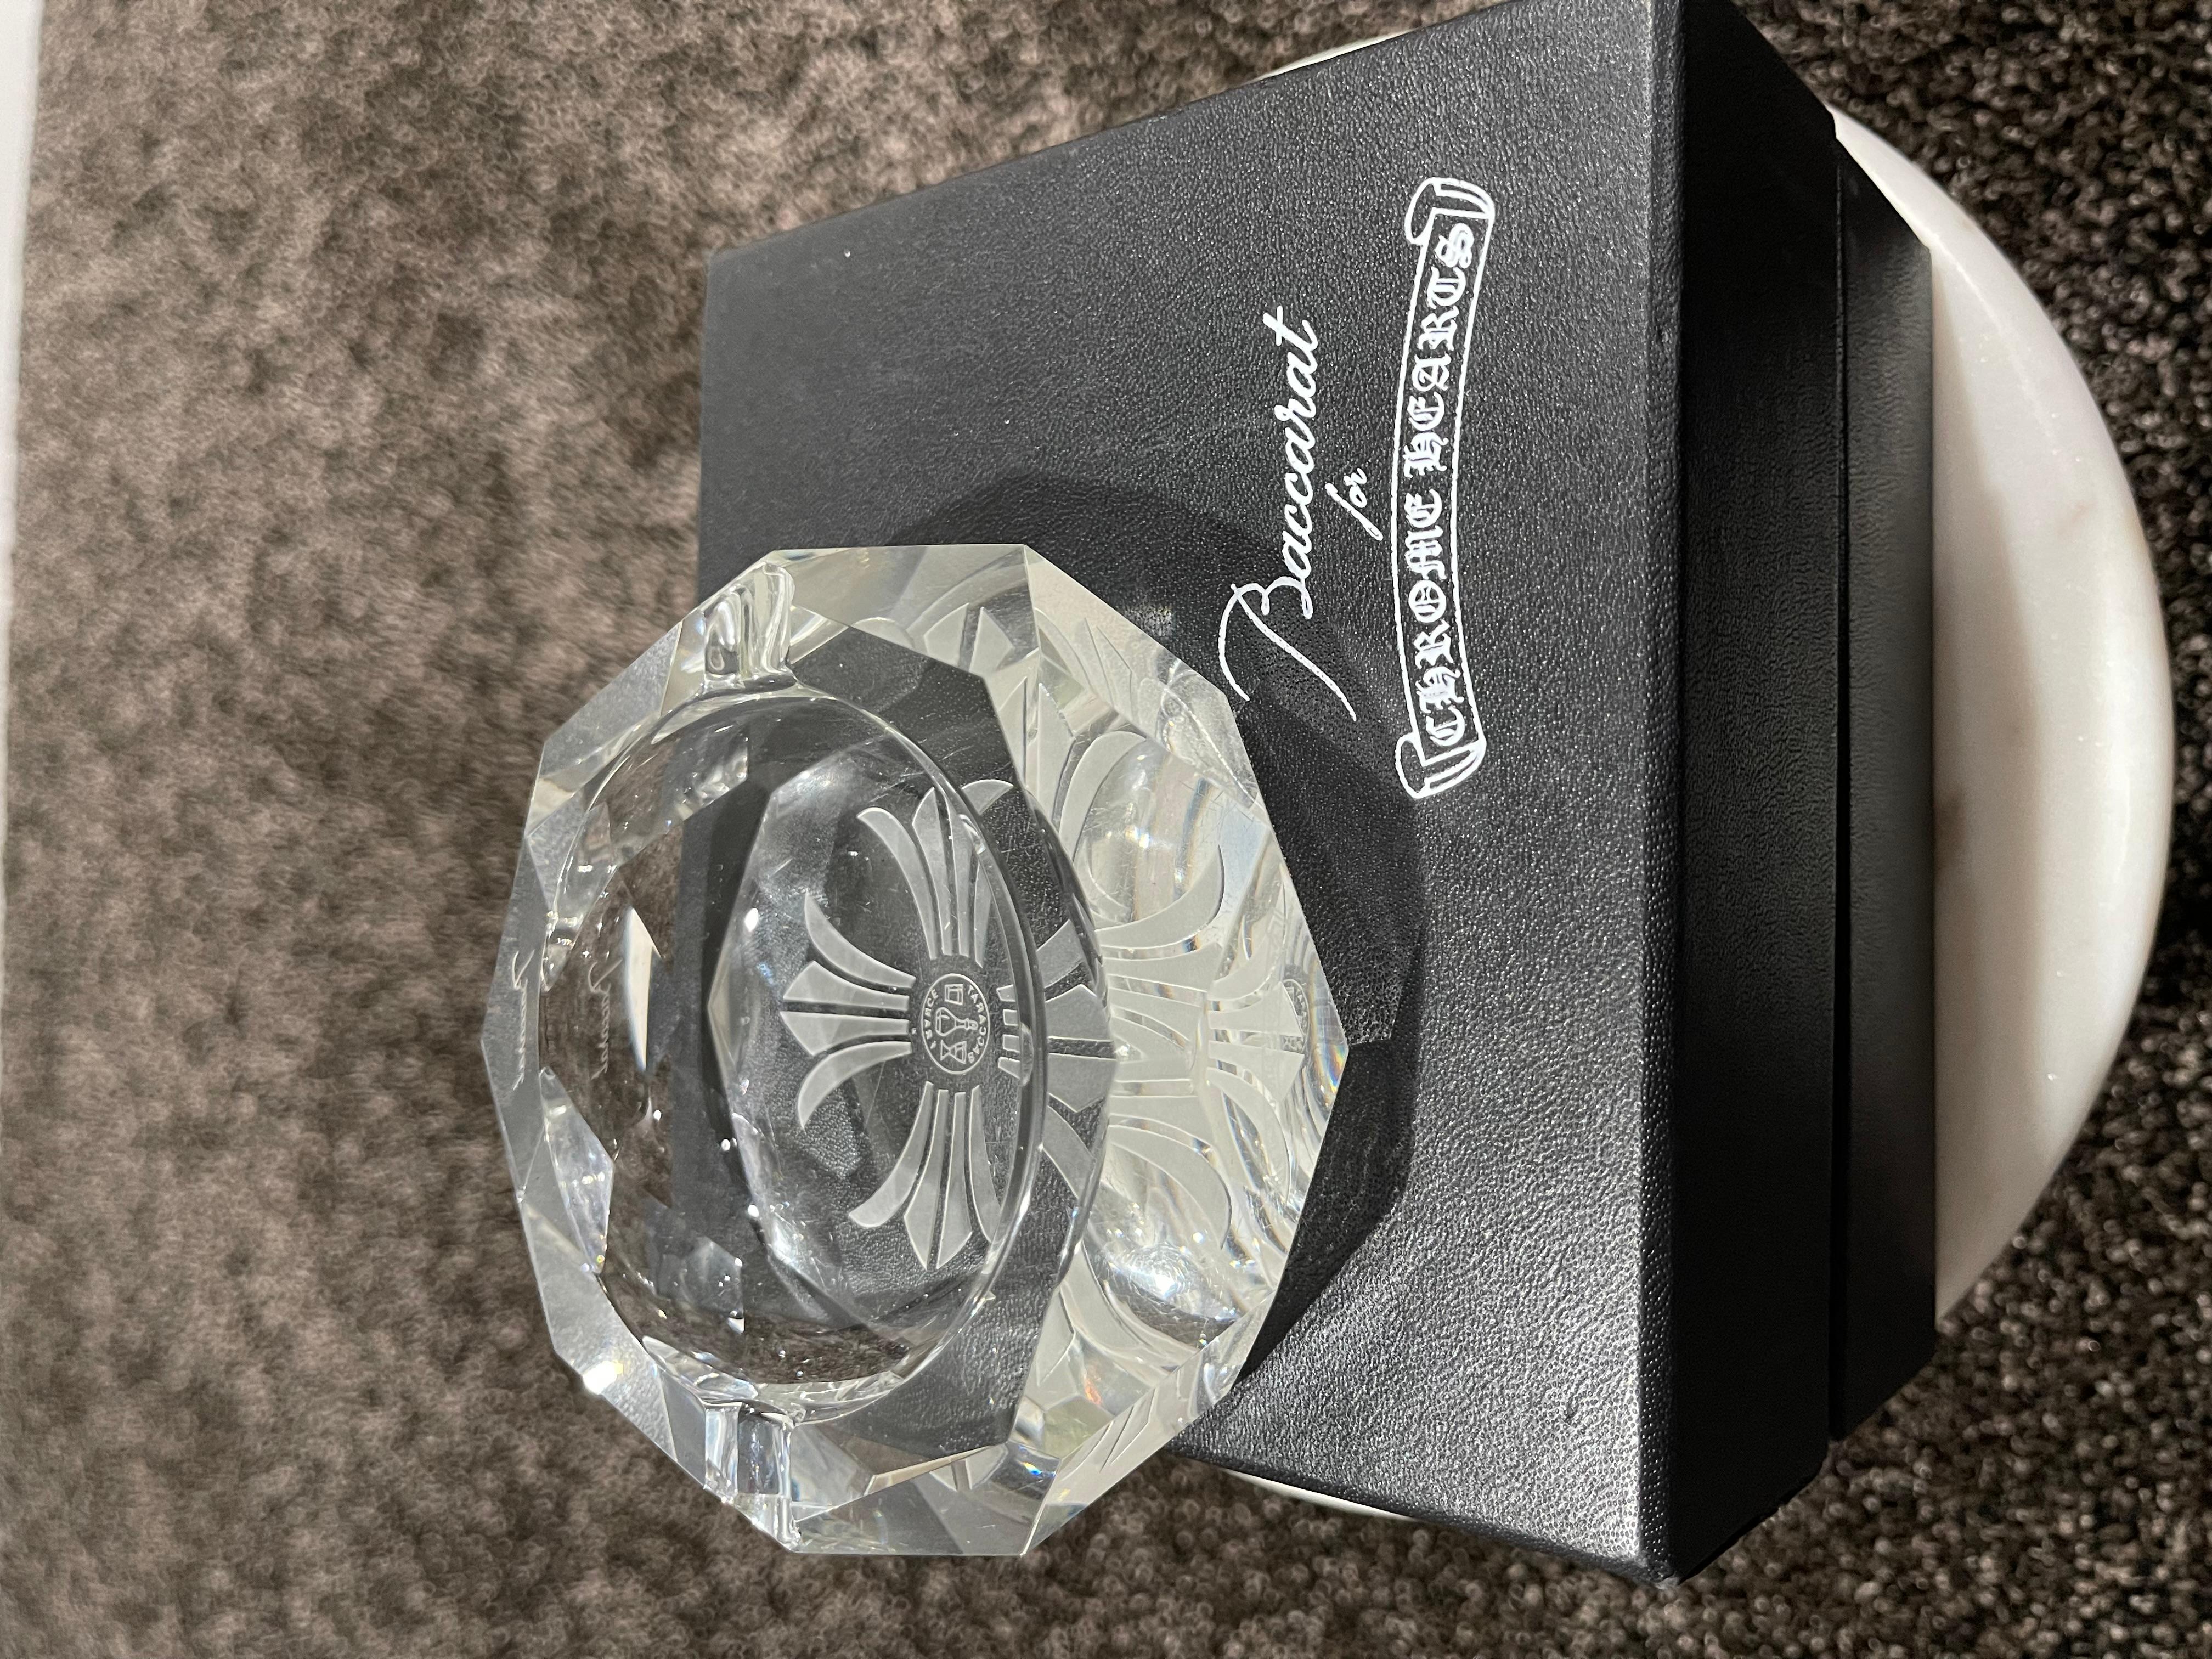 Chrome Hearts Baccarat Ashtray
Brand new w/ box (box has minor damage on side)
Very rare, hard to come by

All Sales are Final.